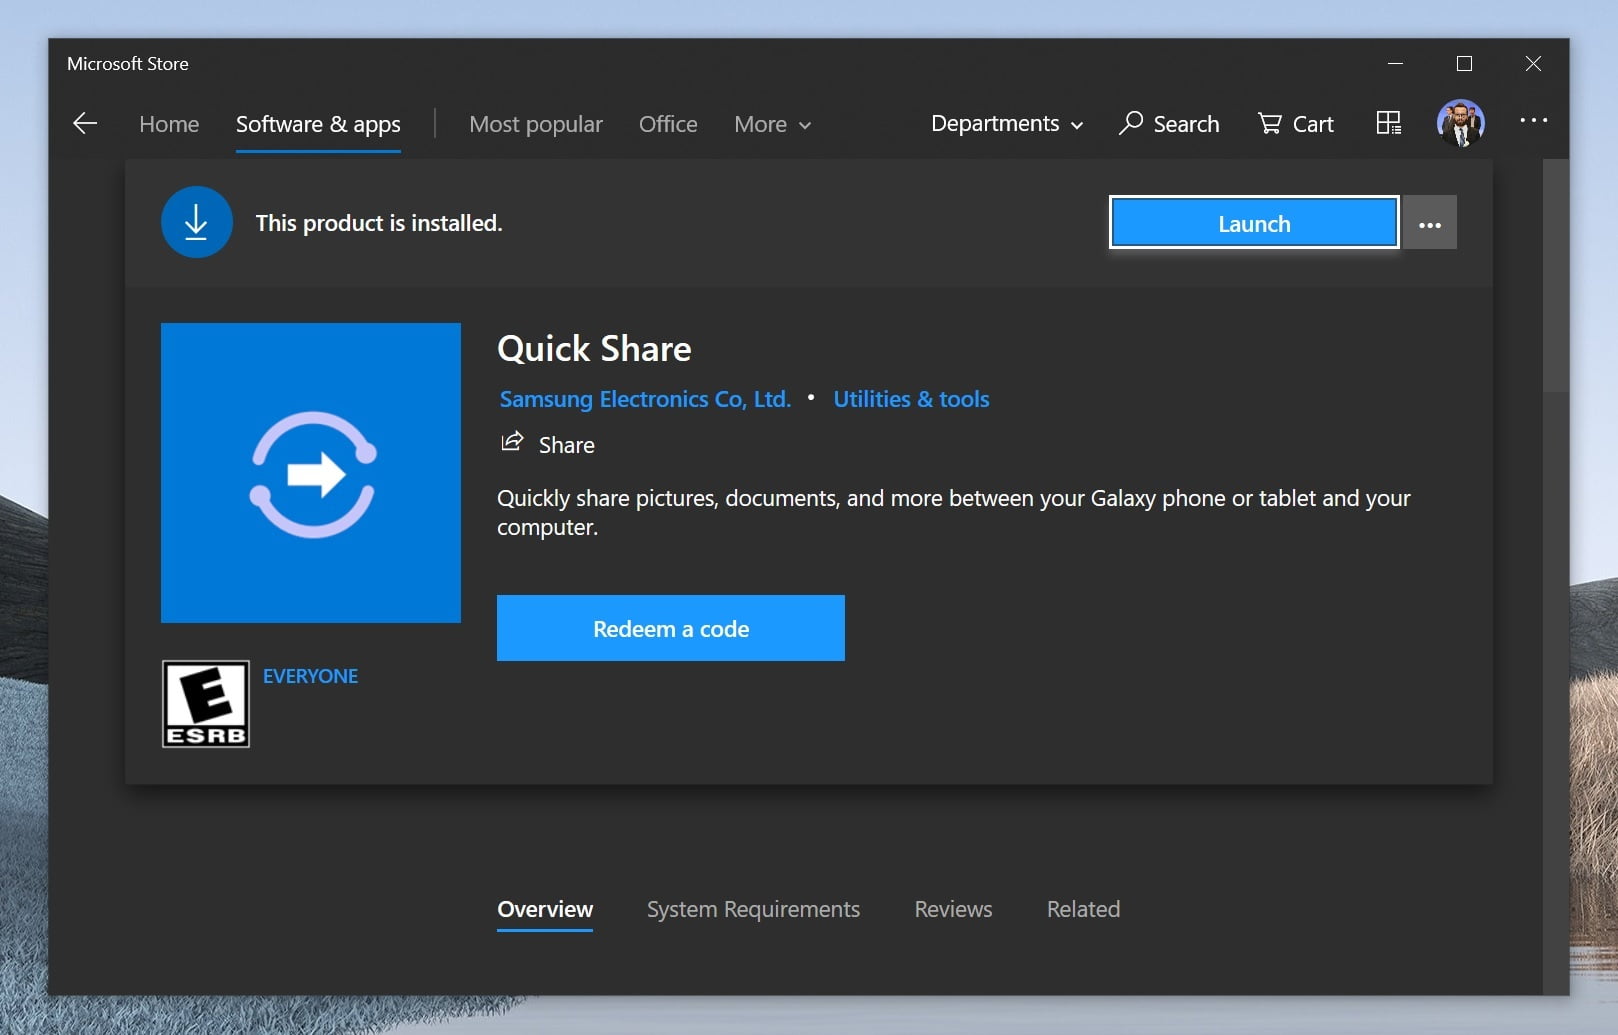 download quick share for pc